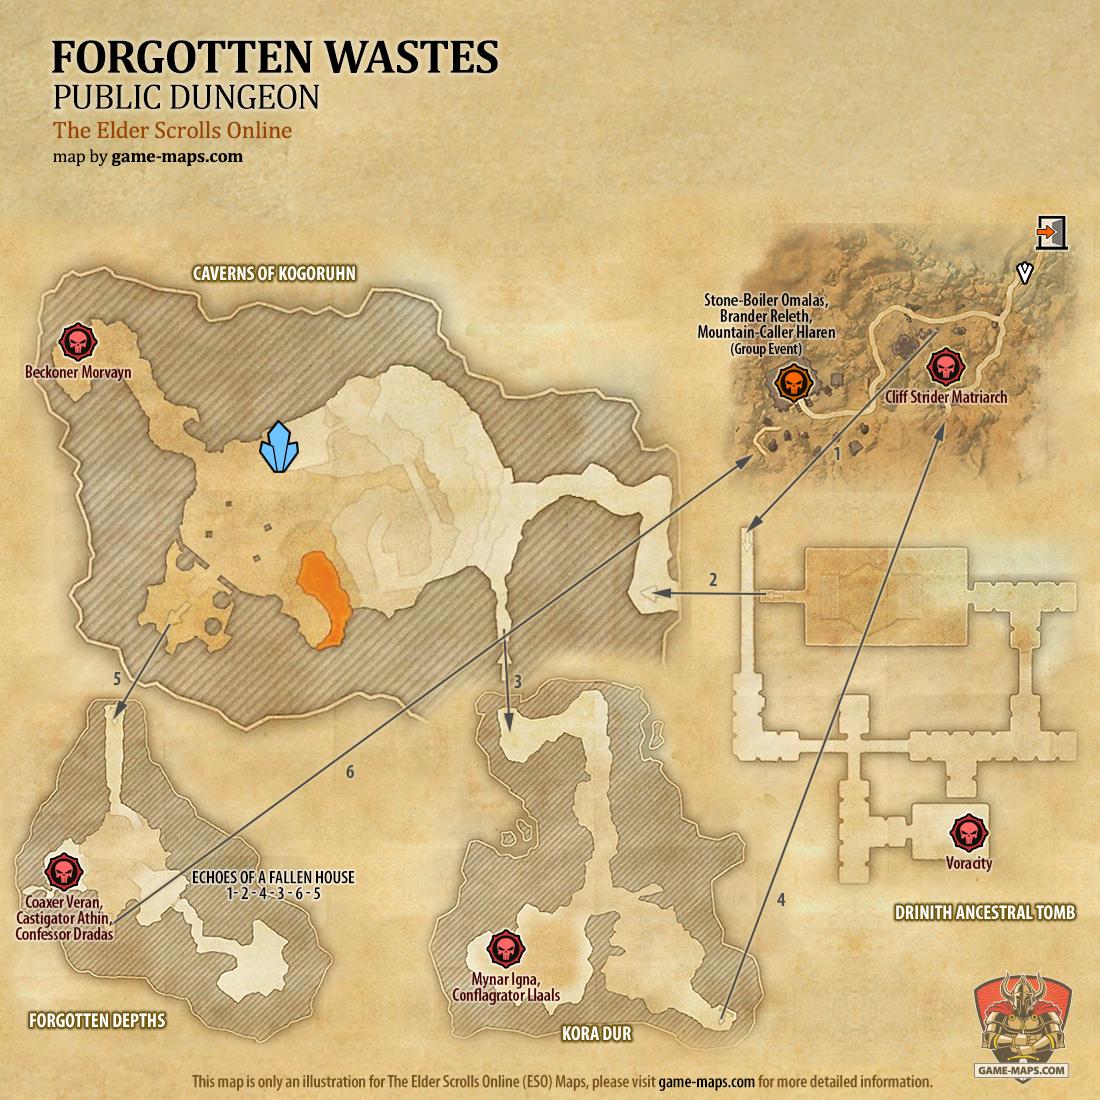 Map of Forgotten Wastes Public Dungeon located in Vvardenfell ESO with Skyshard and Bosses.